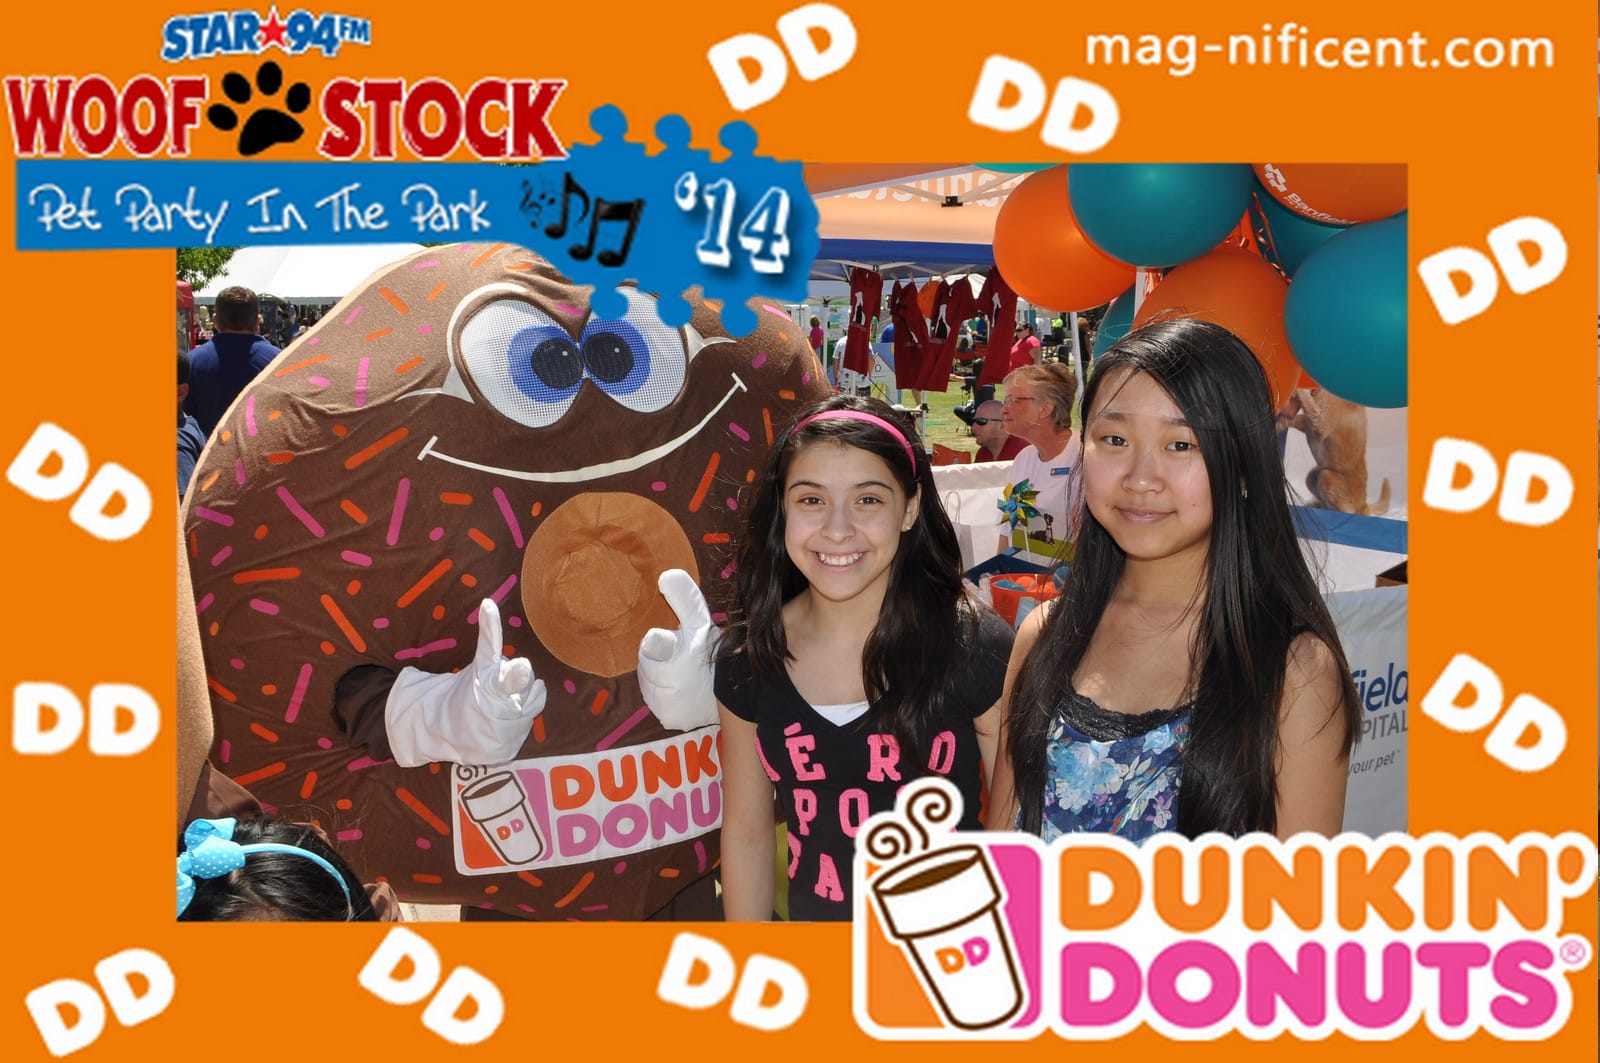 A mag-nificent photo from a dunkin donuts promotion